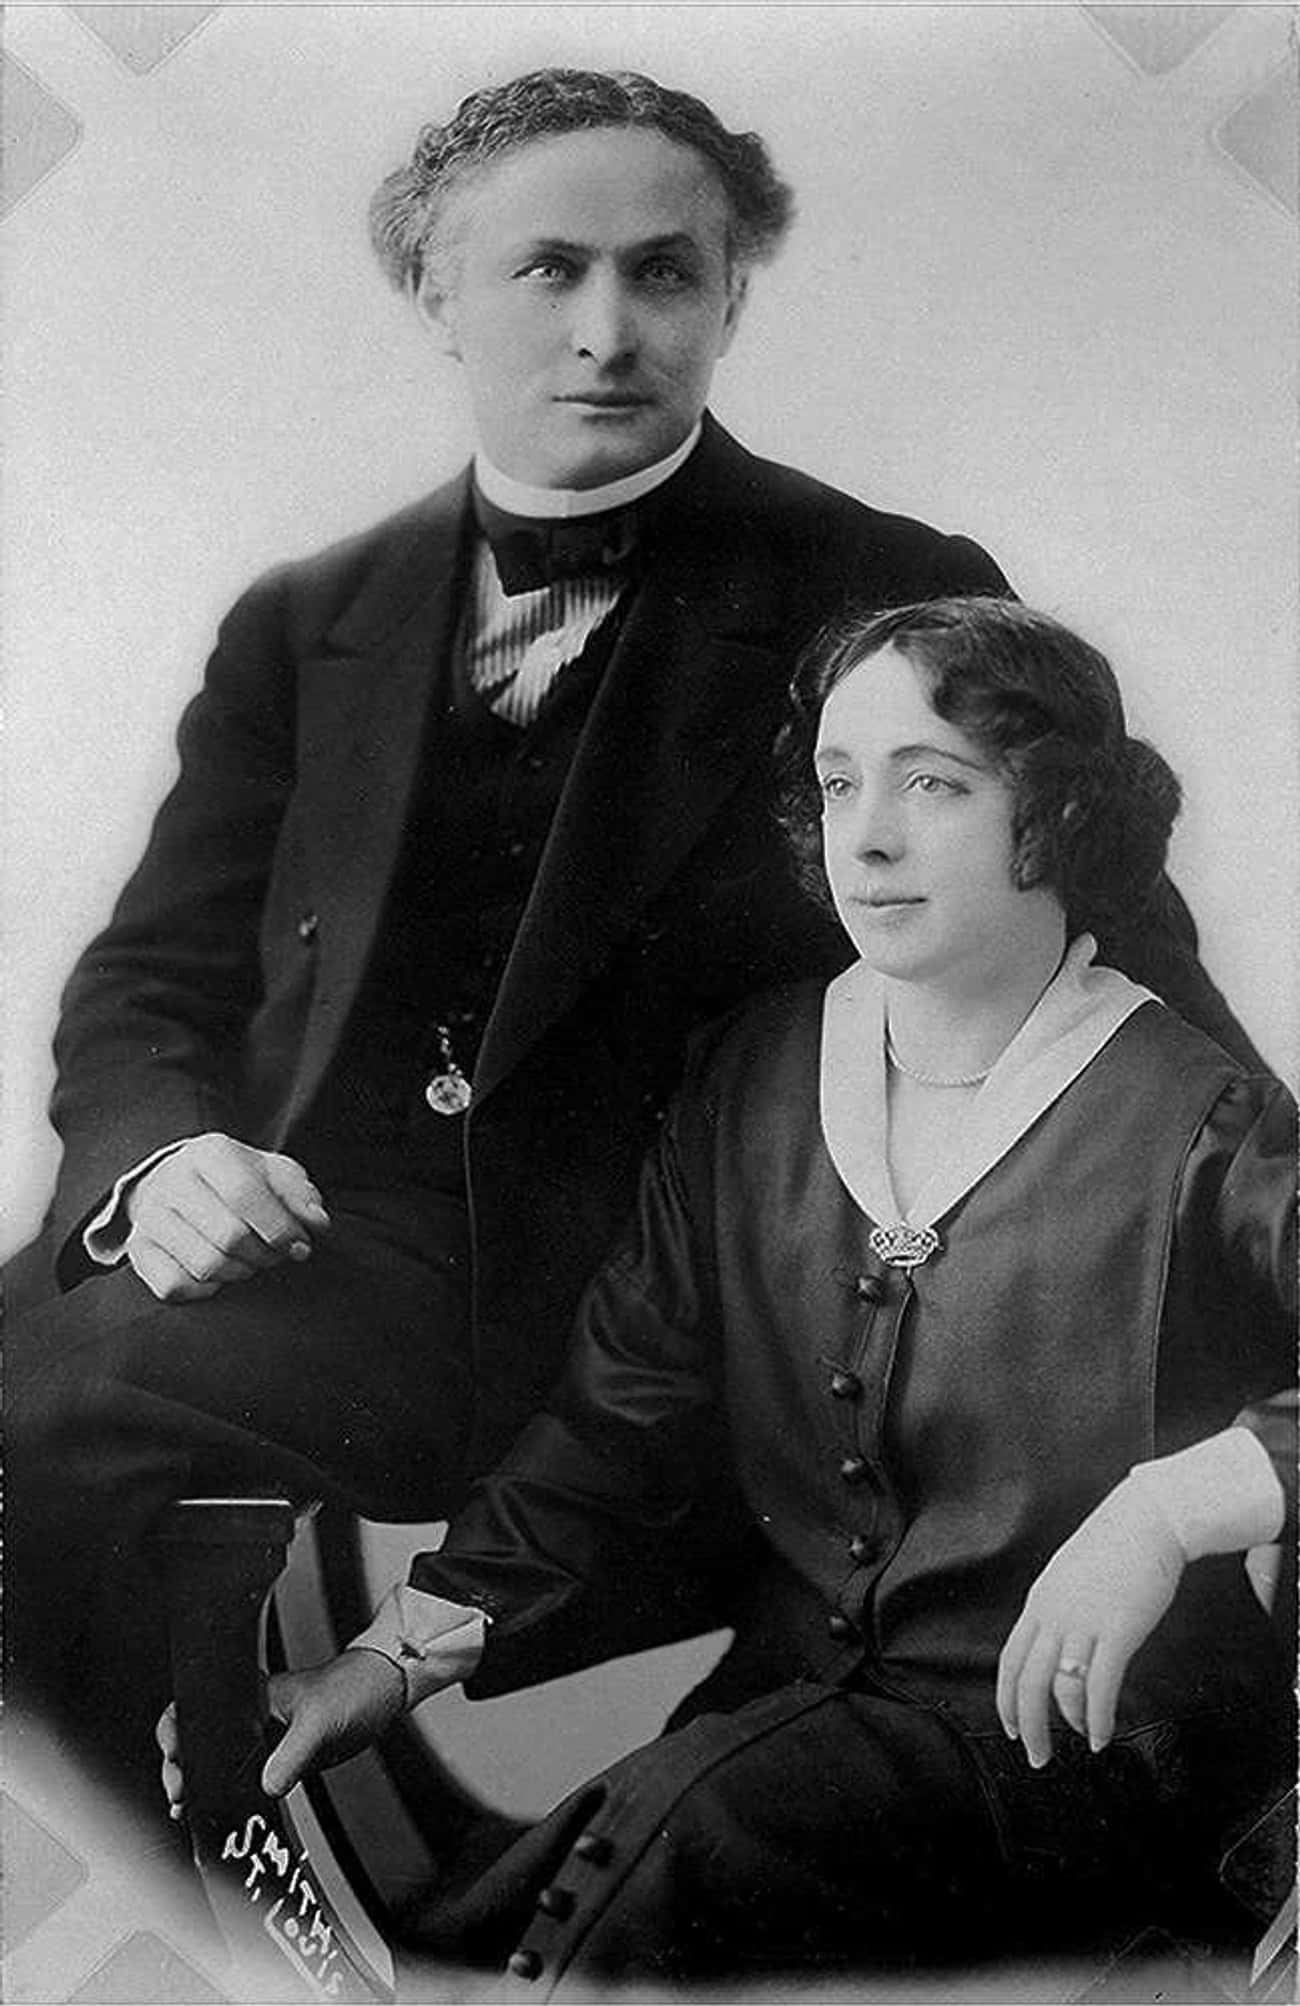  Houdini Gave His Wife A Secret Message To Test One Final Time If He Himself Could ‘Escape’ The Afterlife